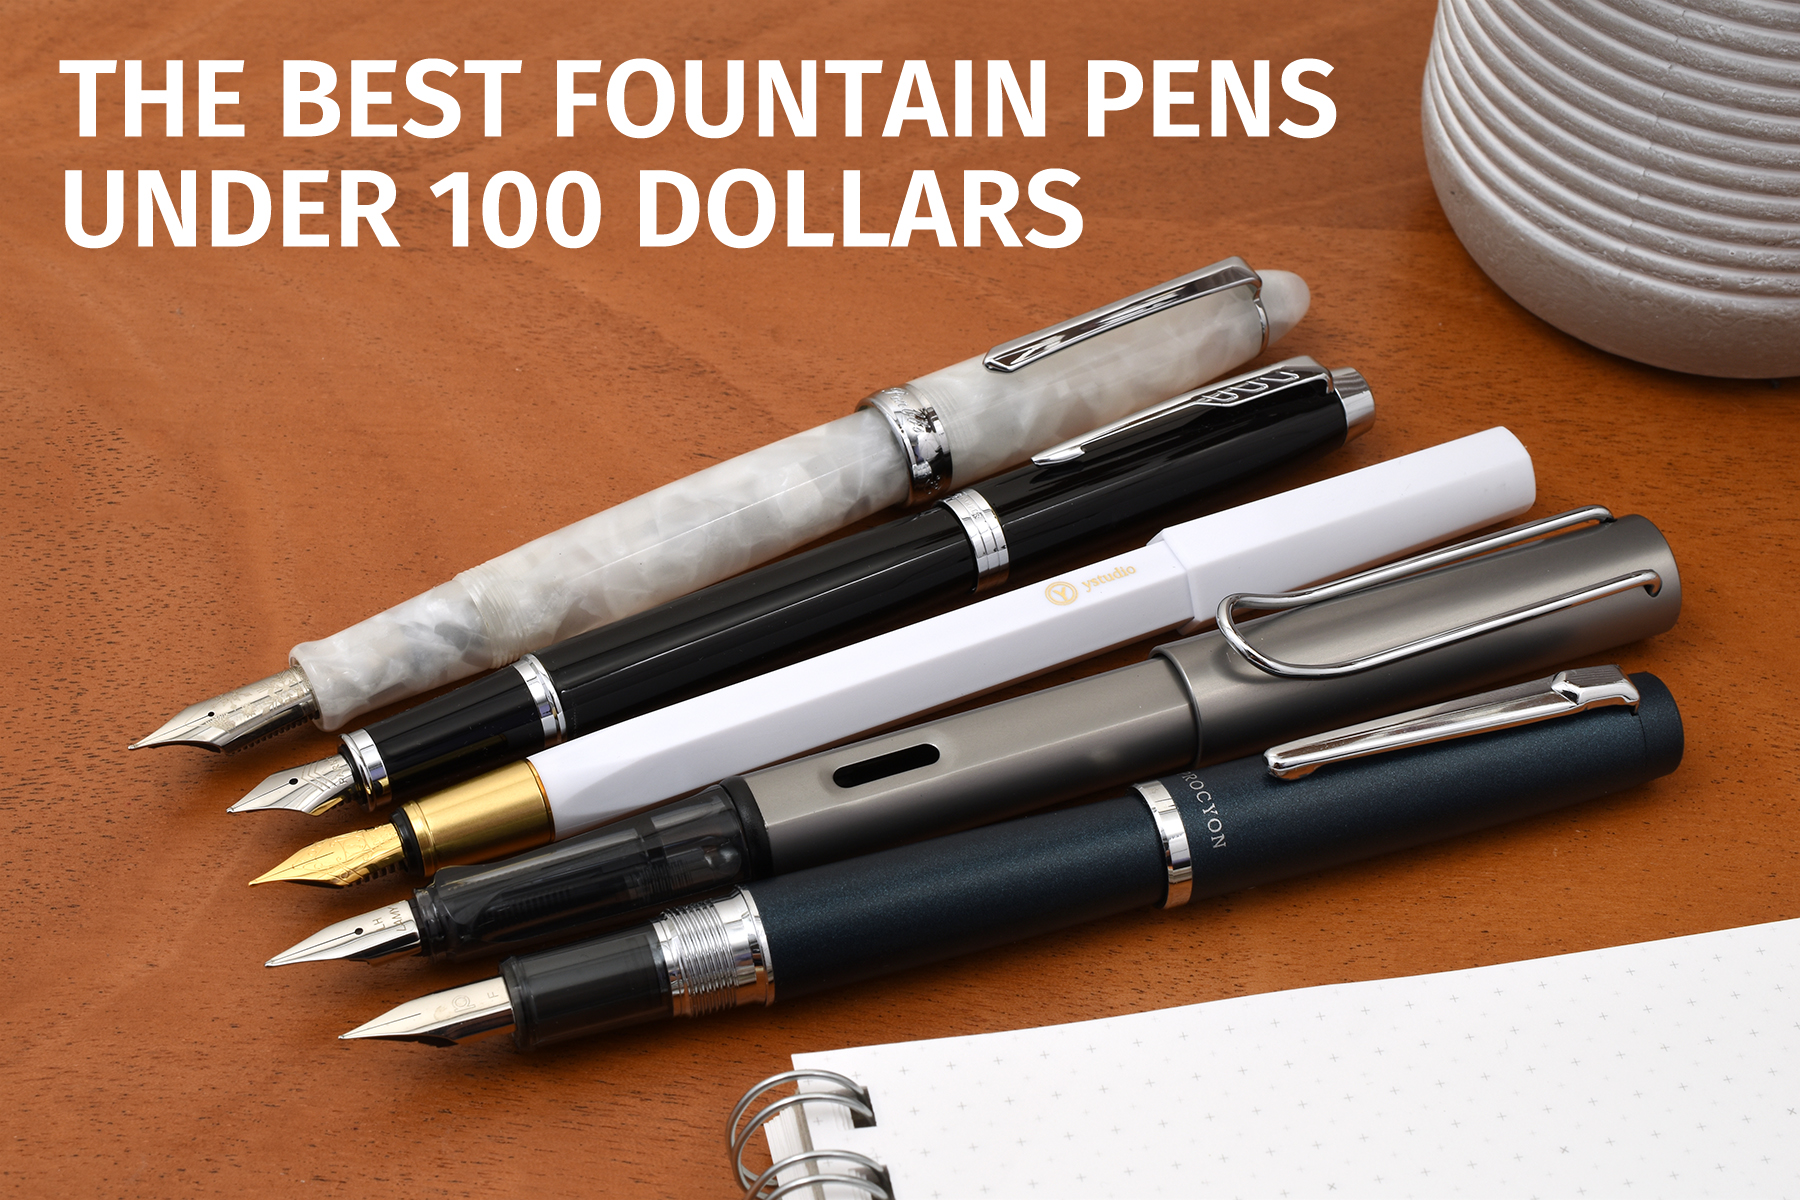 The Best Fountain Pens Under 100 Dollars